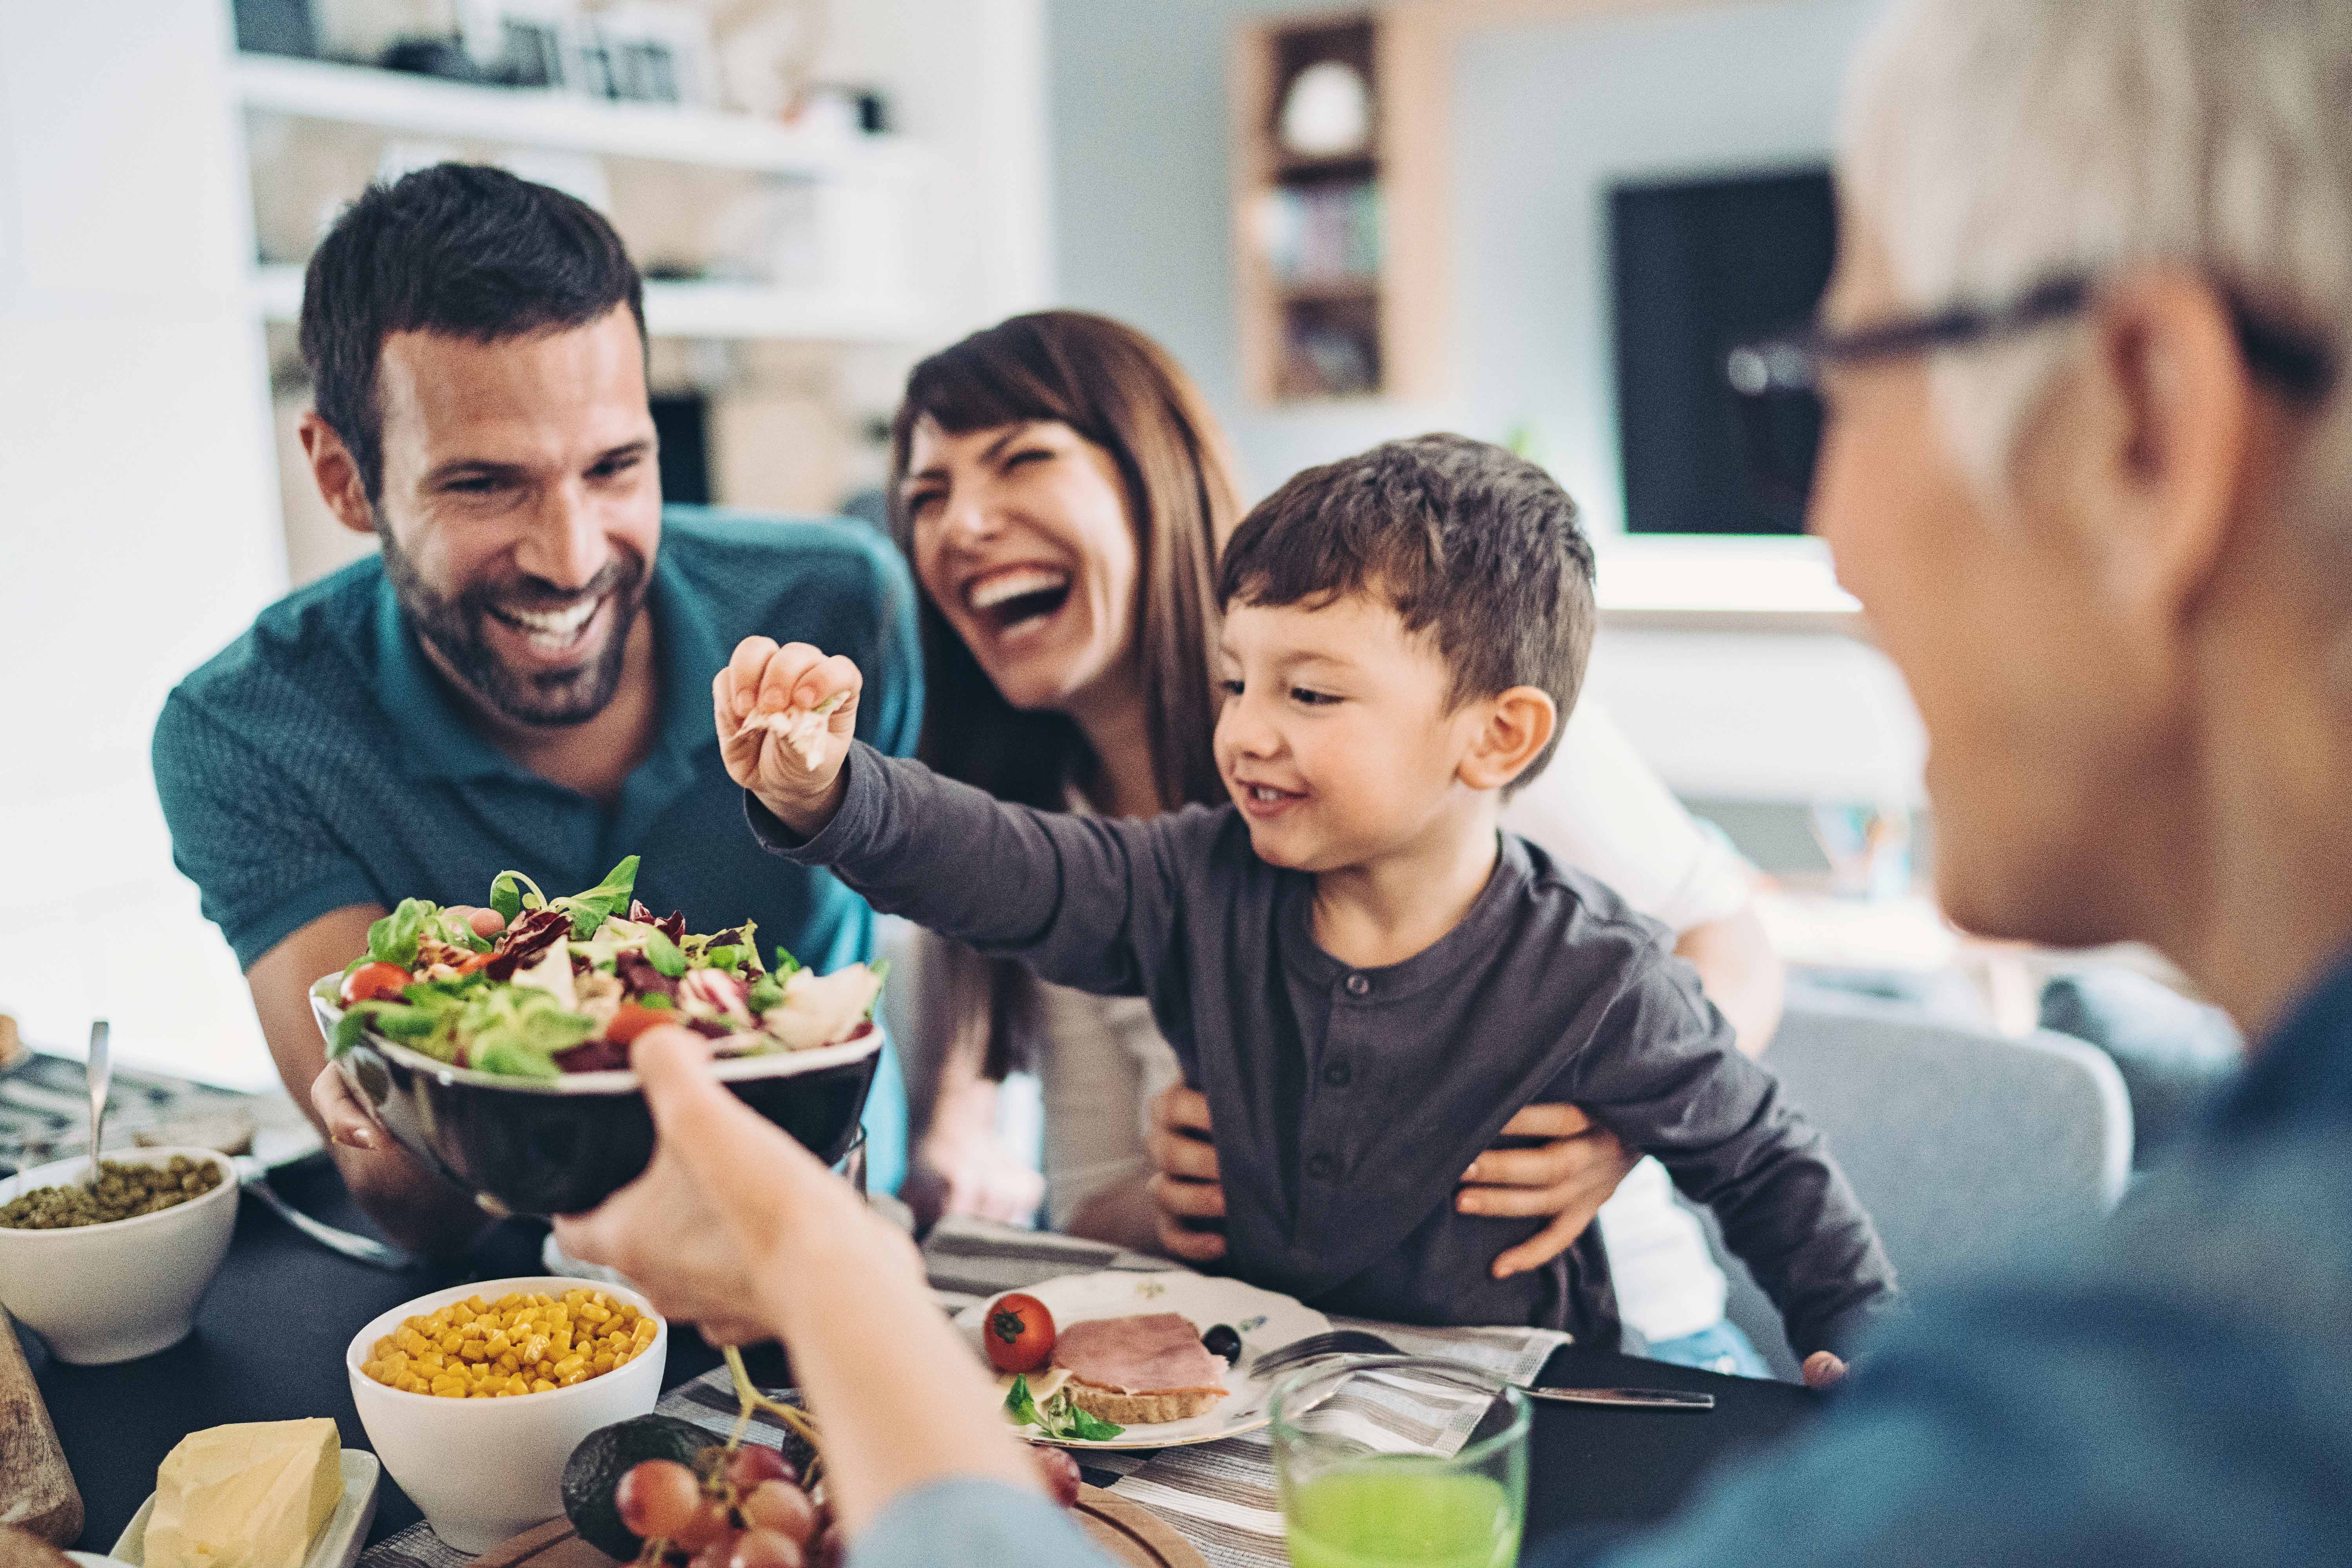 Man, woman, and child laughing over a bowl of food with a grandmother looking on